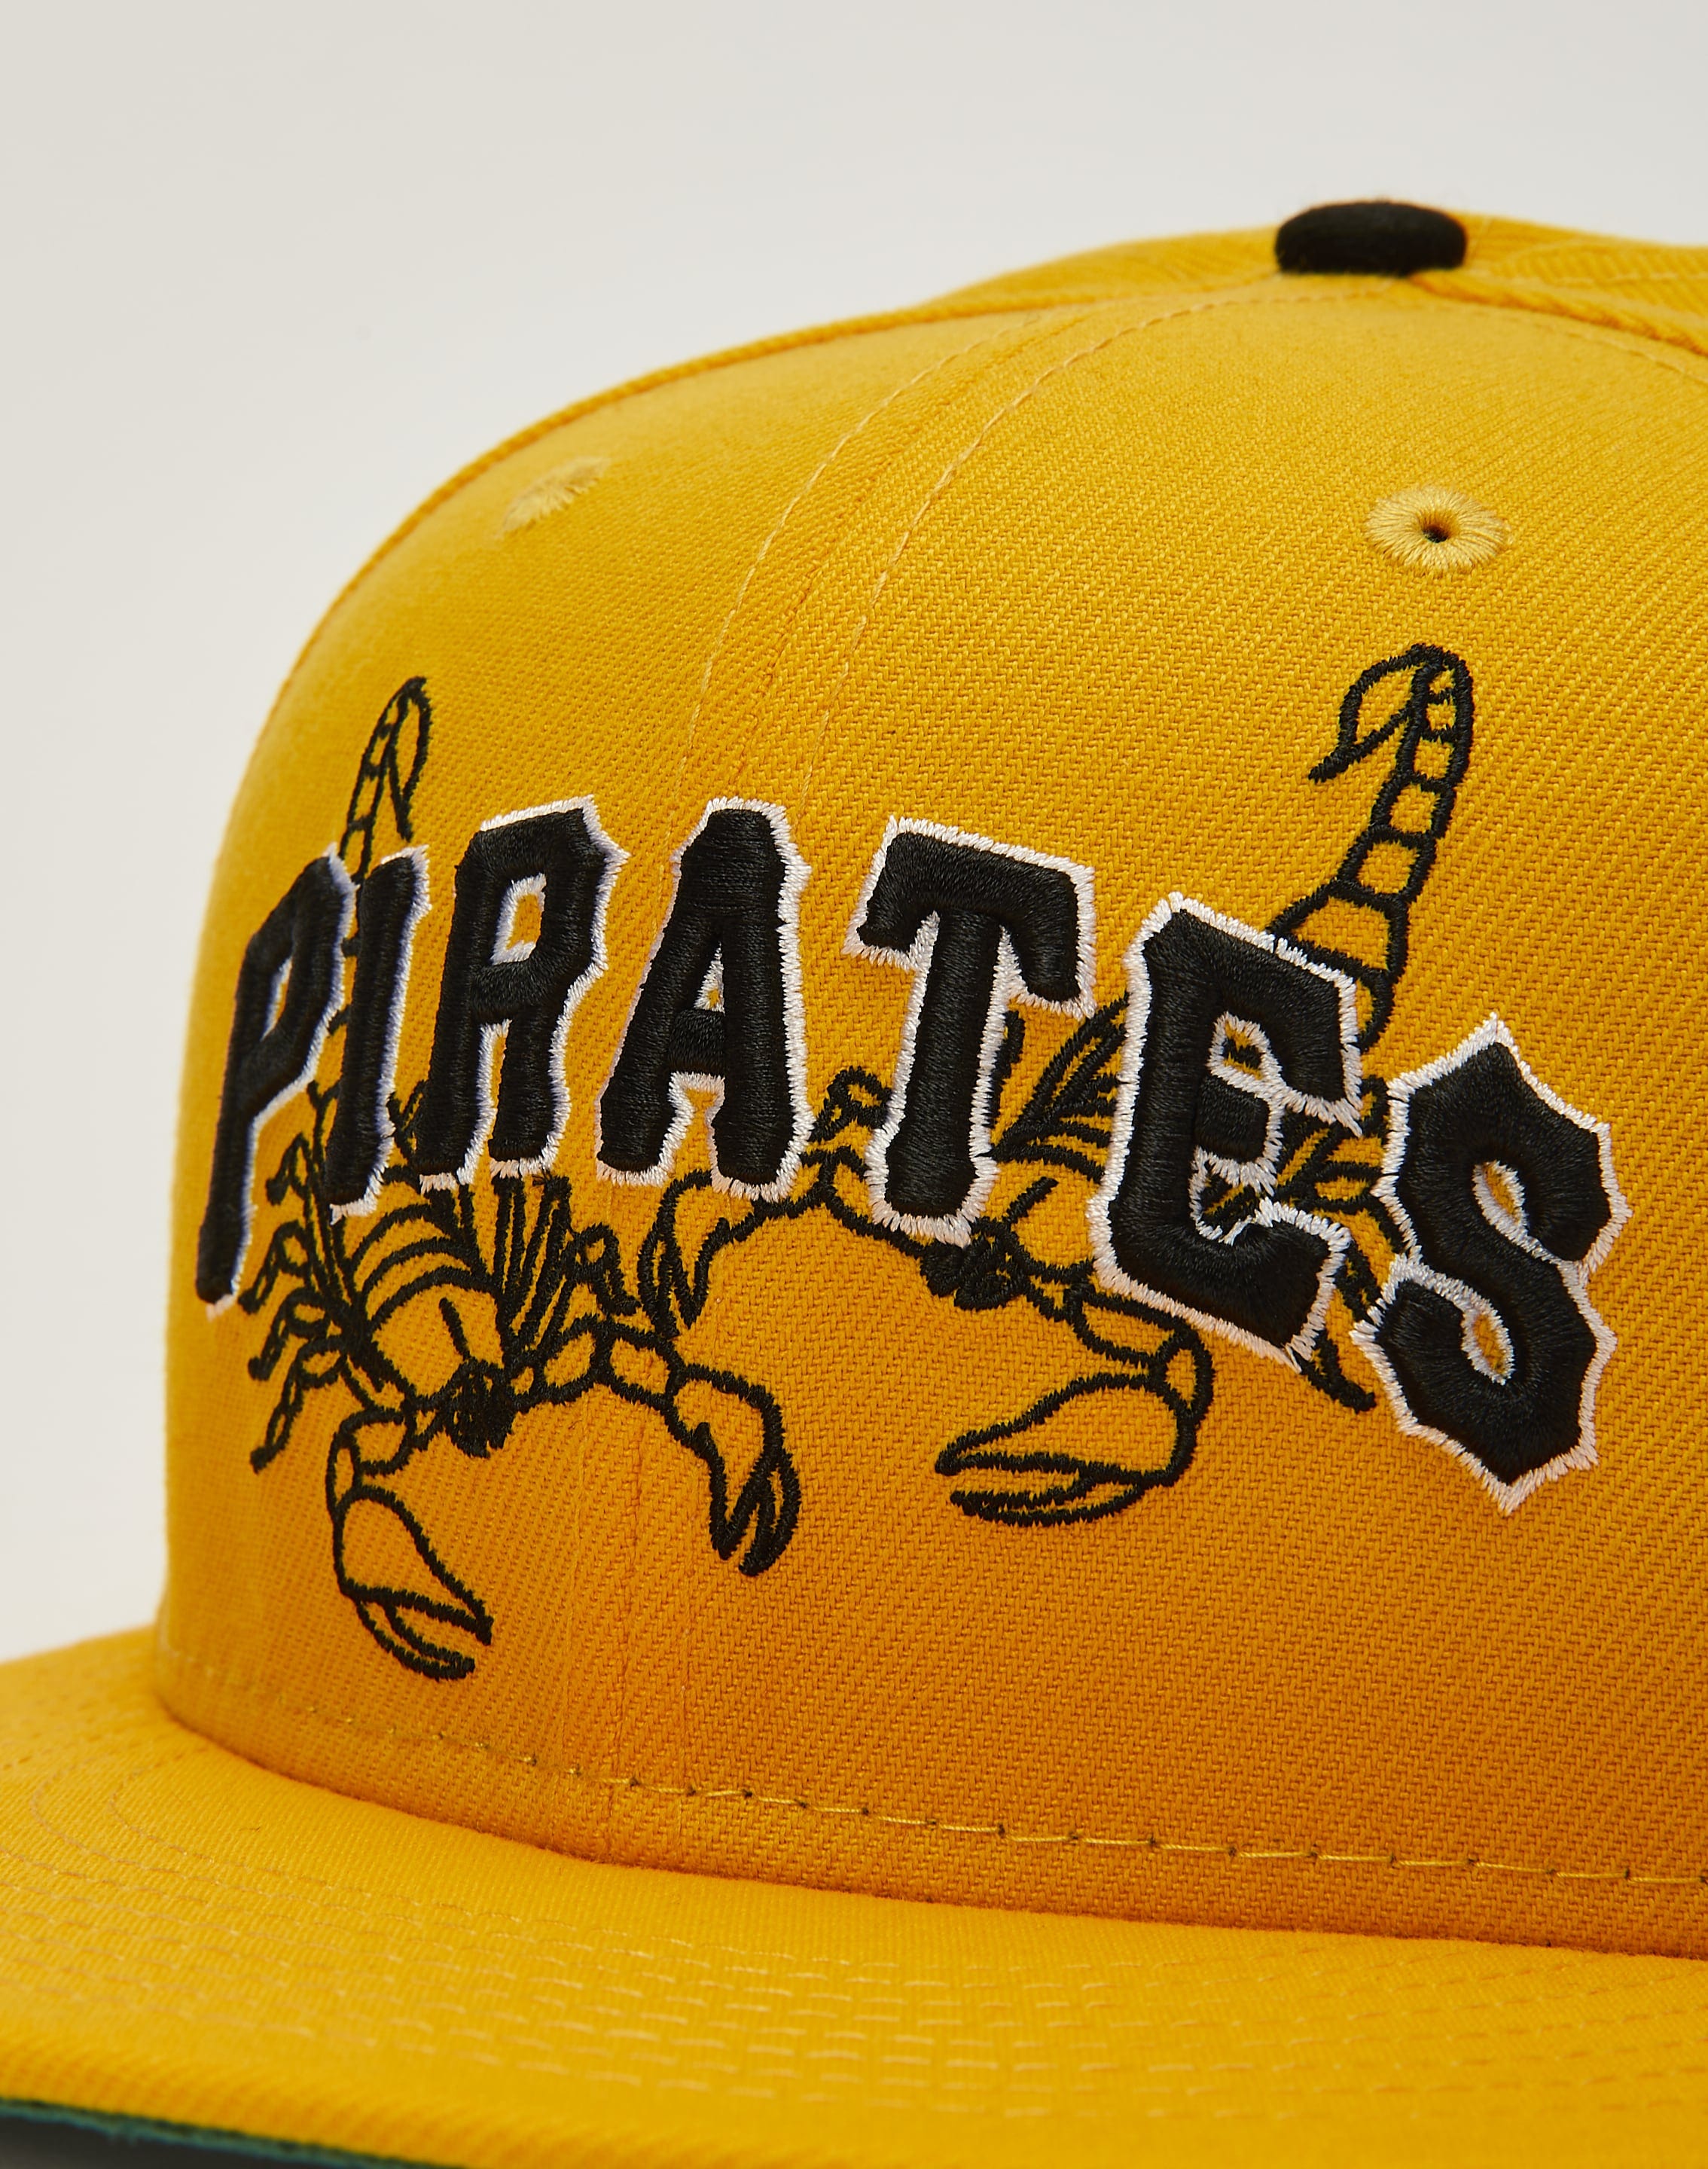 Men's Pittsburgh Pirates New Era Turquoise/Yellow Spring Two-Tone 9FIFTY  Snapback Hat